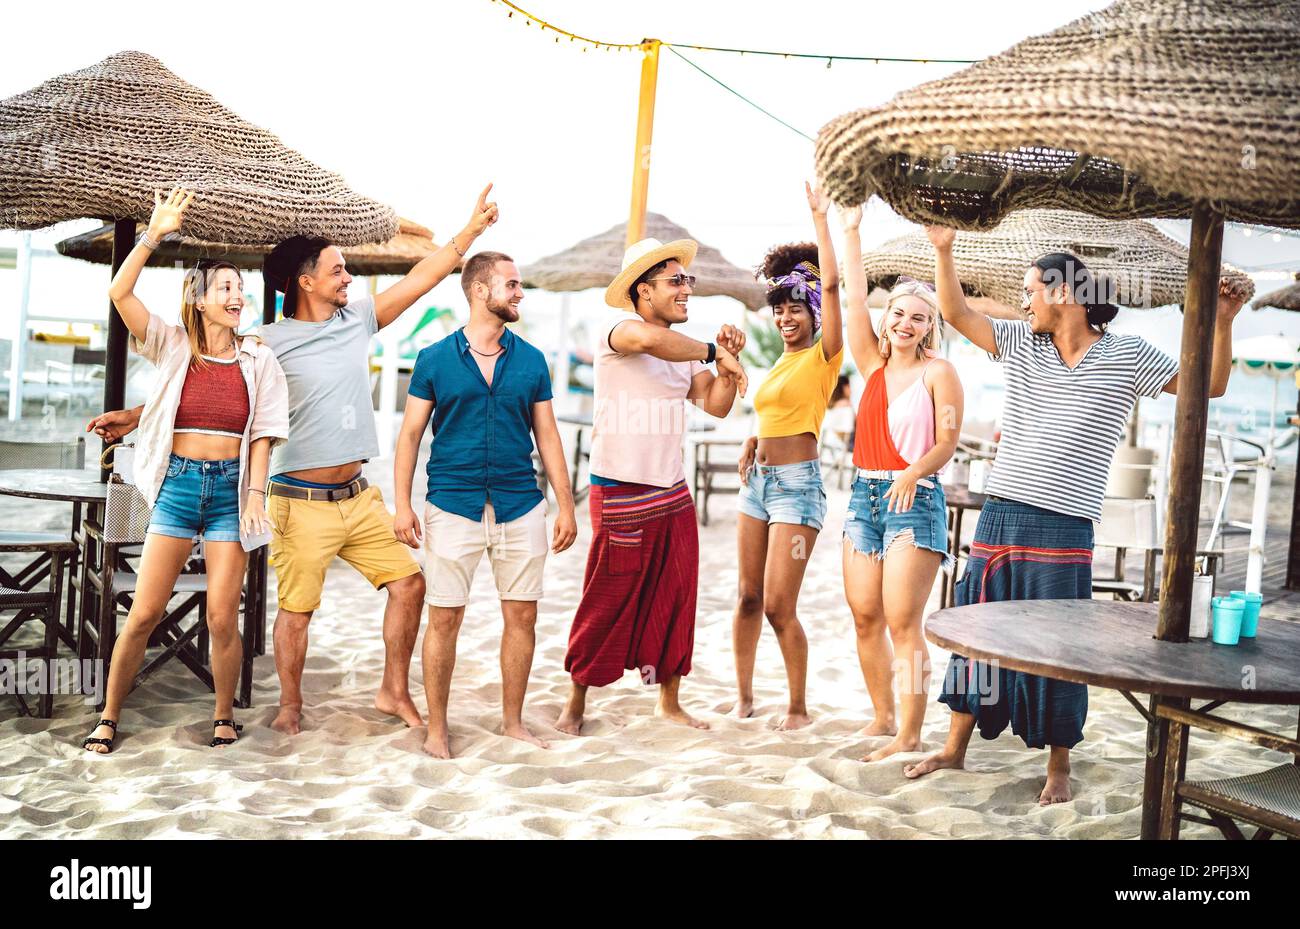 Young trendy friends dancing and having fun at chiringuito beach club - Friendship life style concept with happy people together at spring break fest Stock Photo